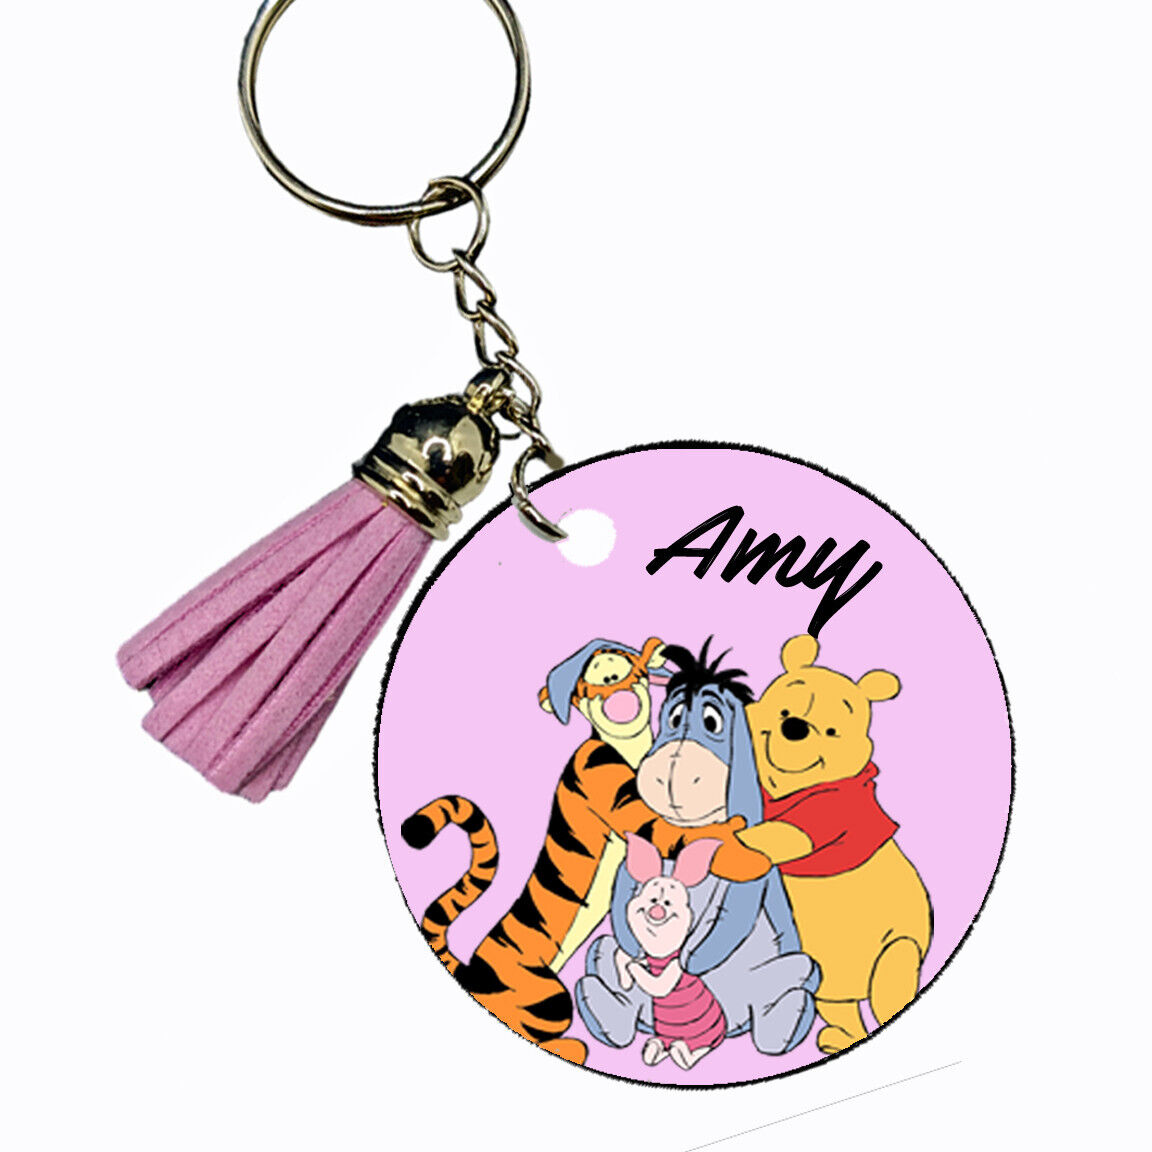 Winnie the Pooh & Friends Personalized Keyring Key Chain ANY Name Custom Gift